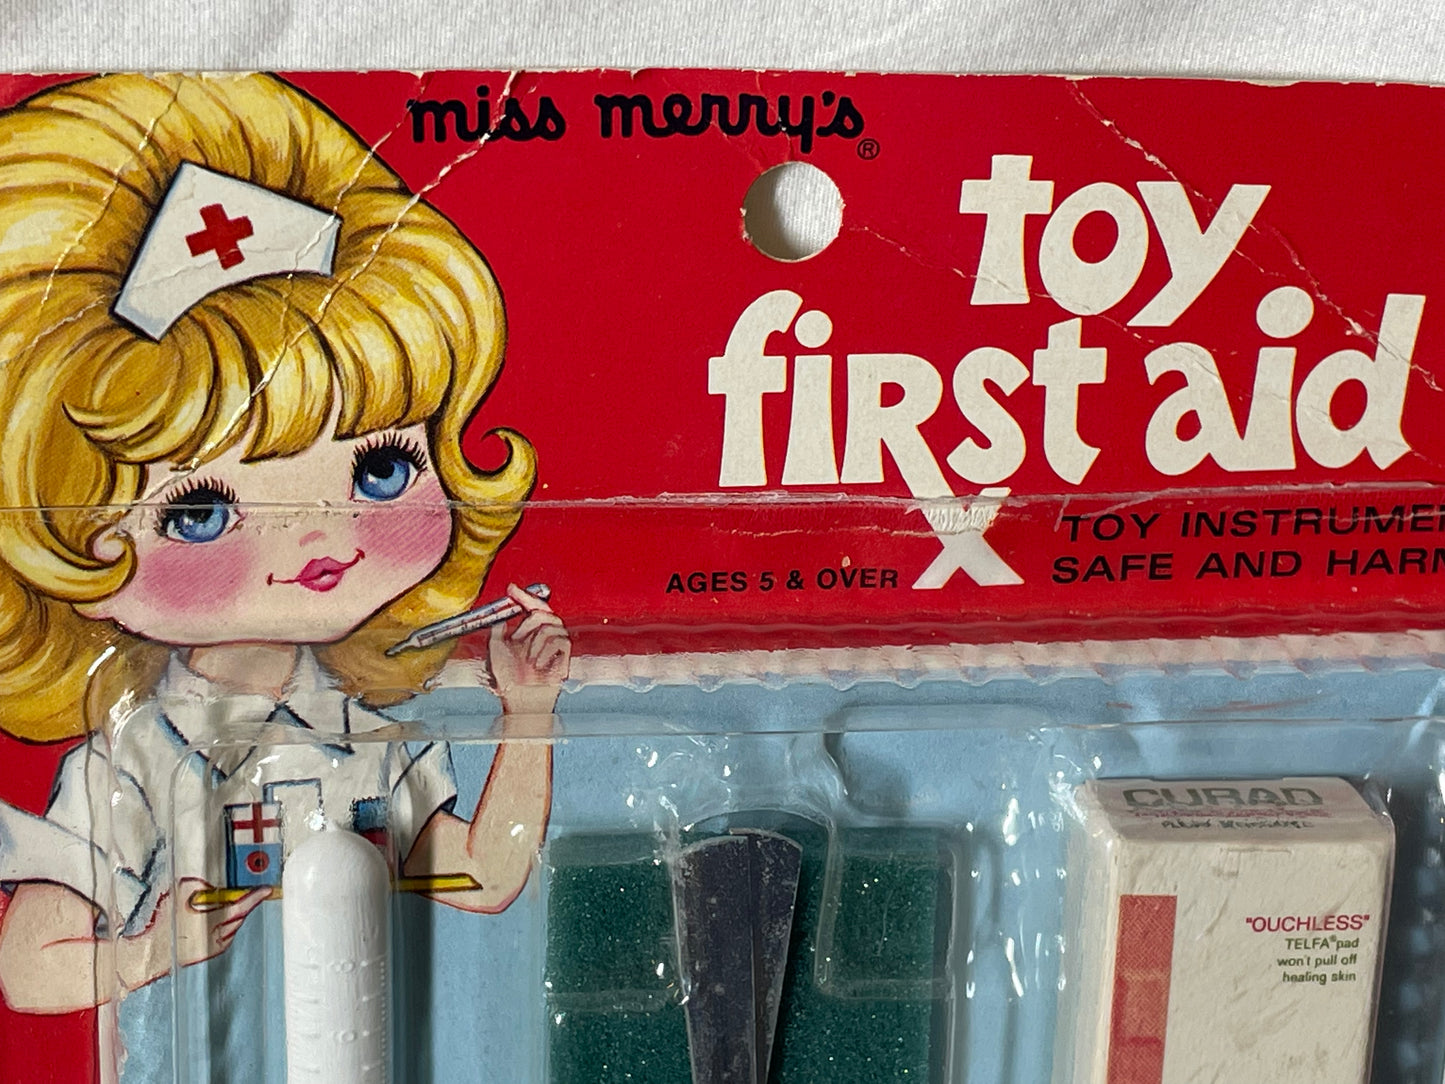 Miss Merry’s Toy First Aid Kit #100052